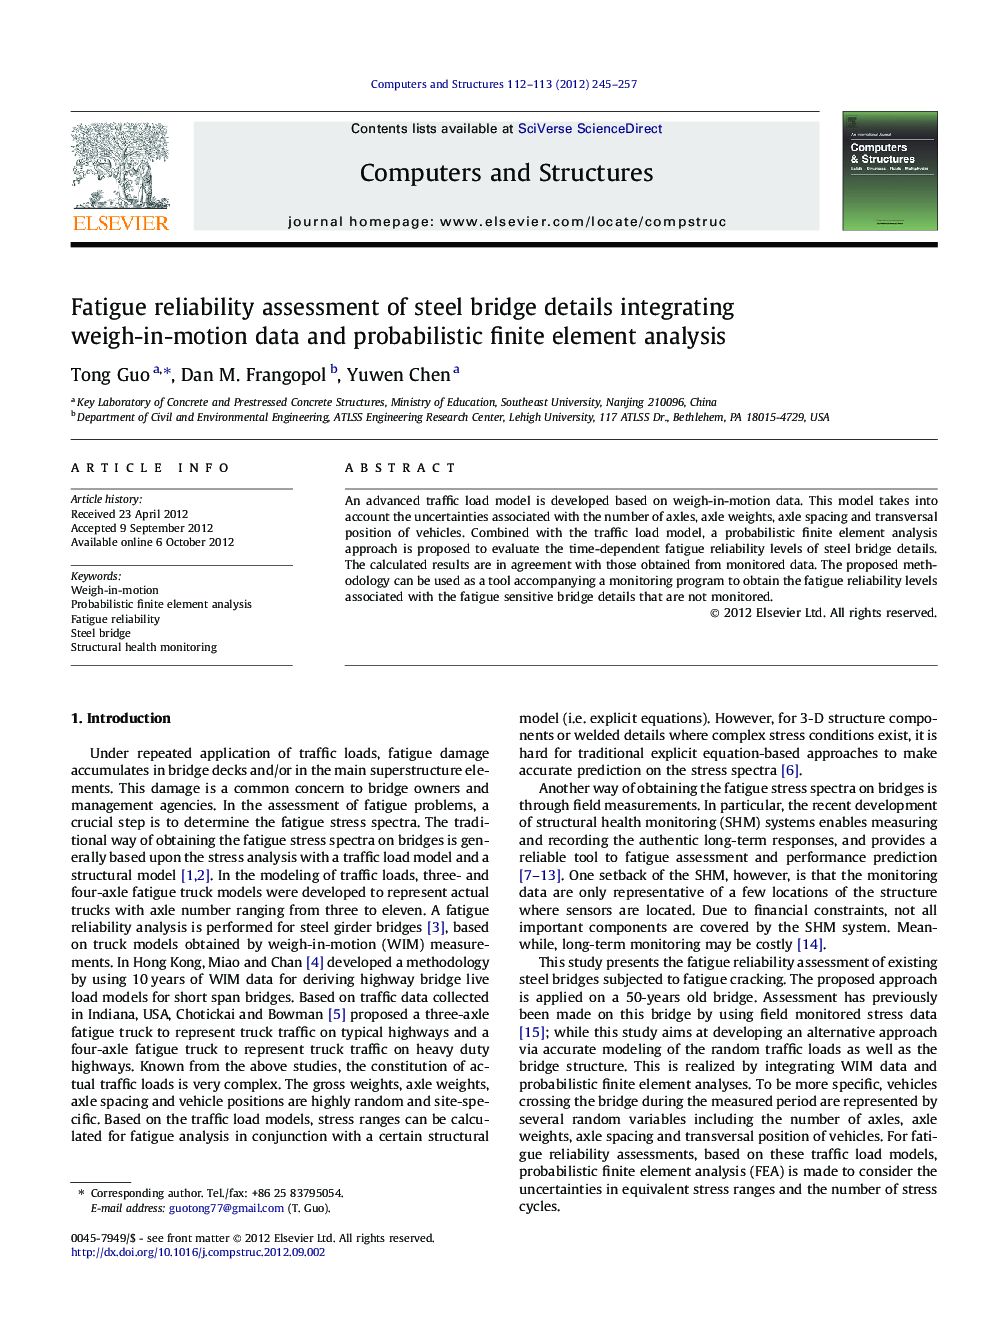 Fatigue reliability assessment of steel bridge details integrating weigh-in-motion data and probabilistic finite element analysis